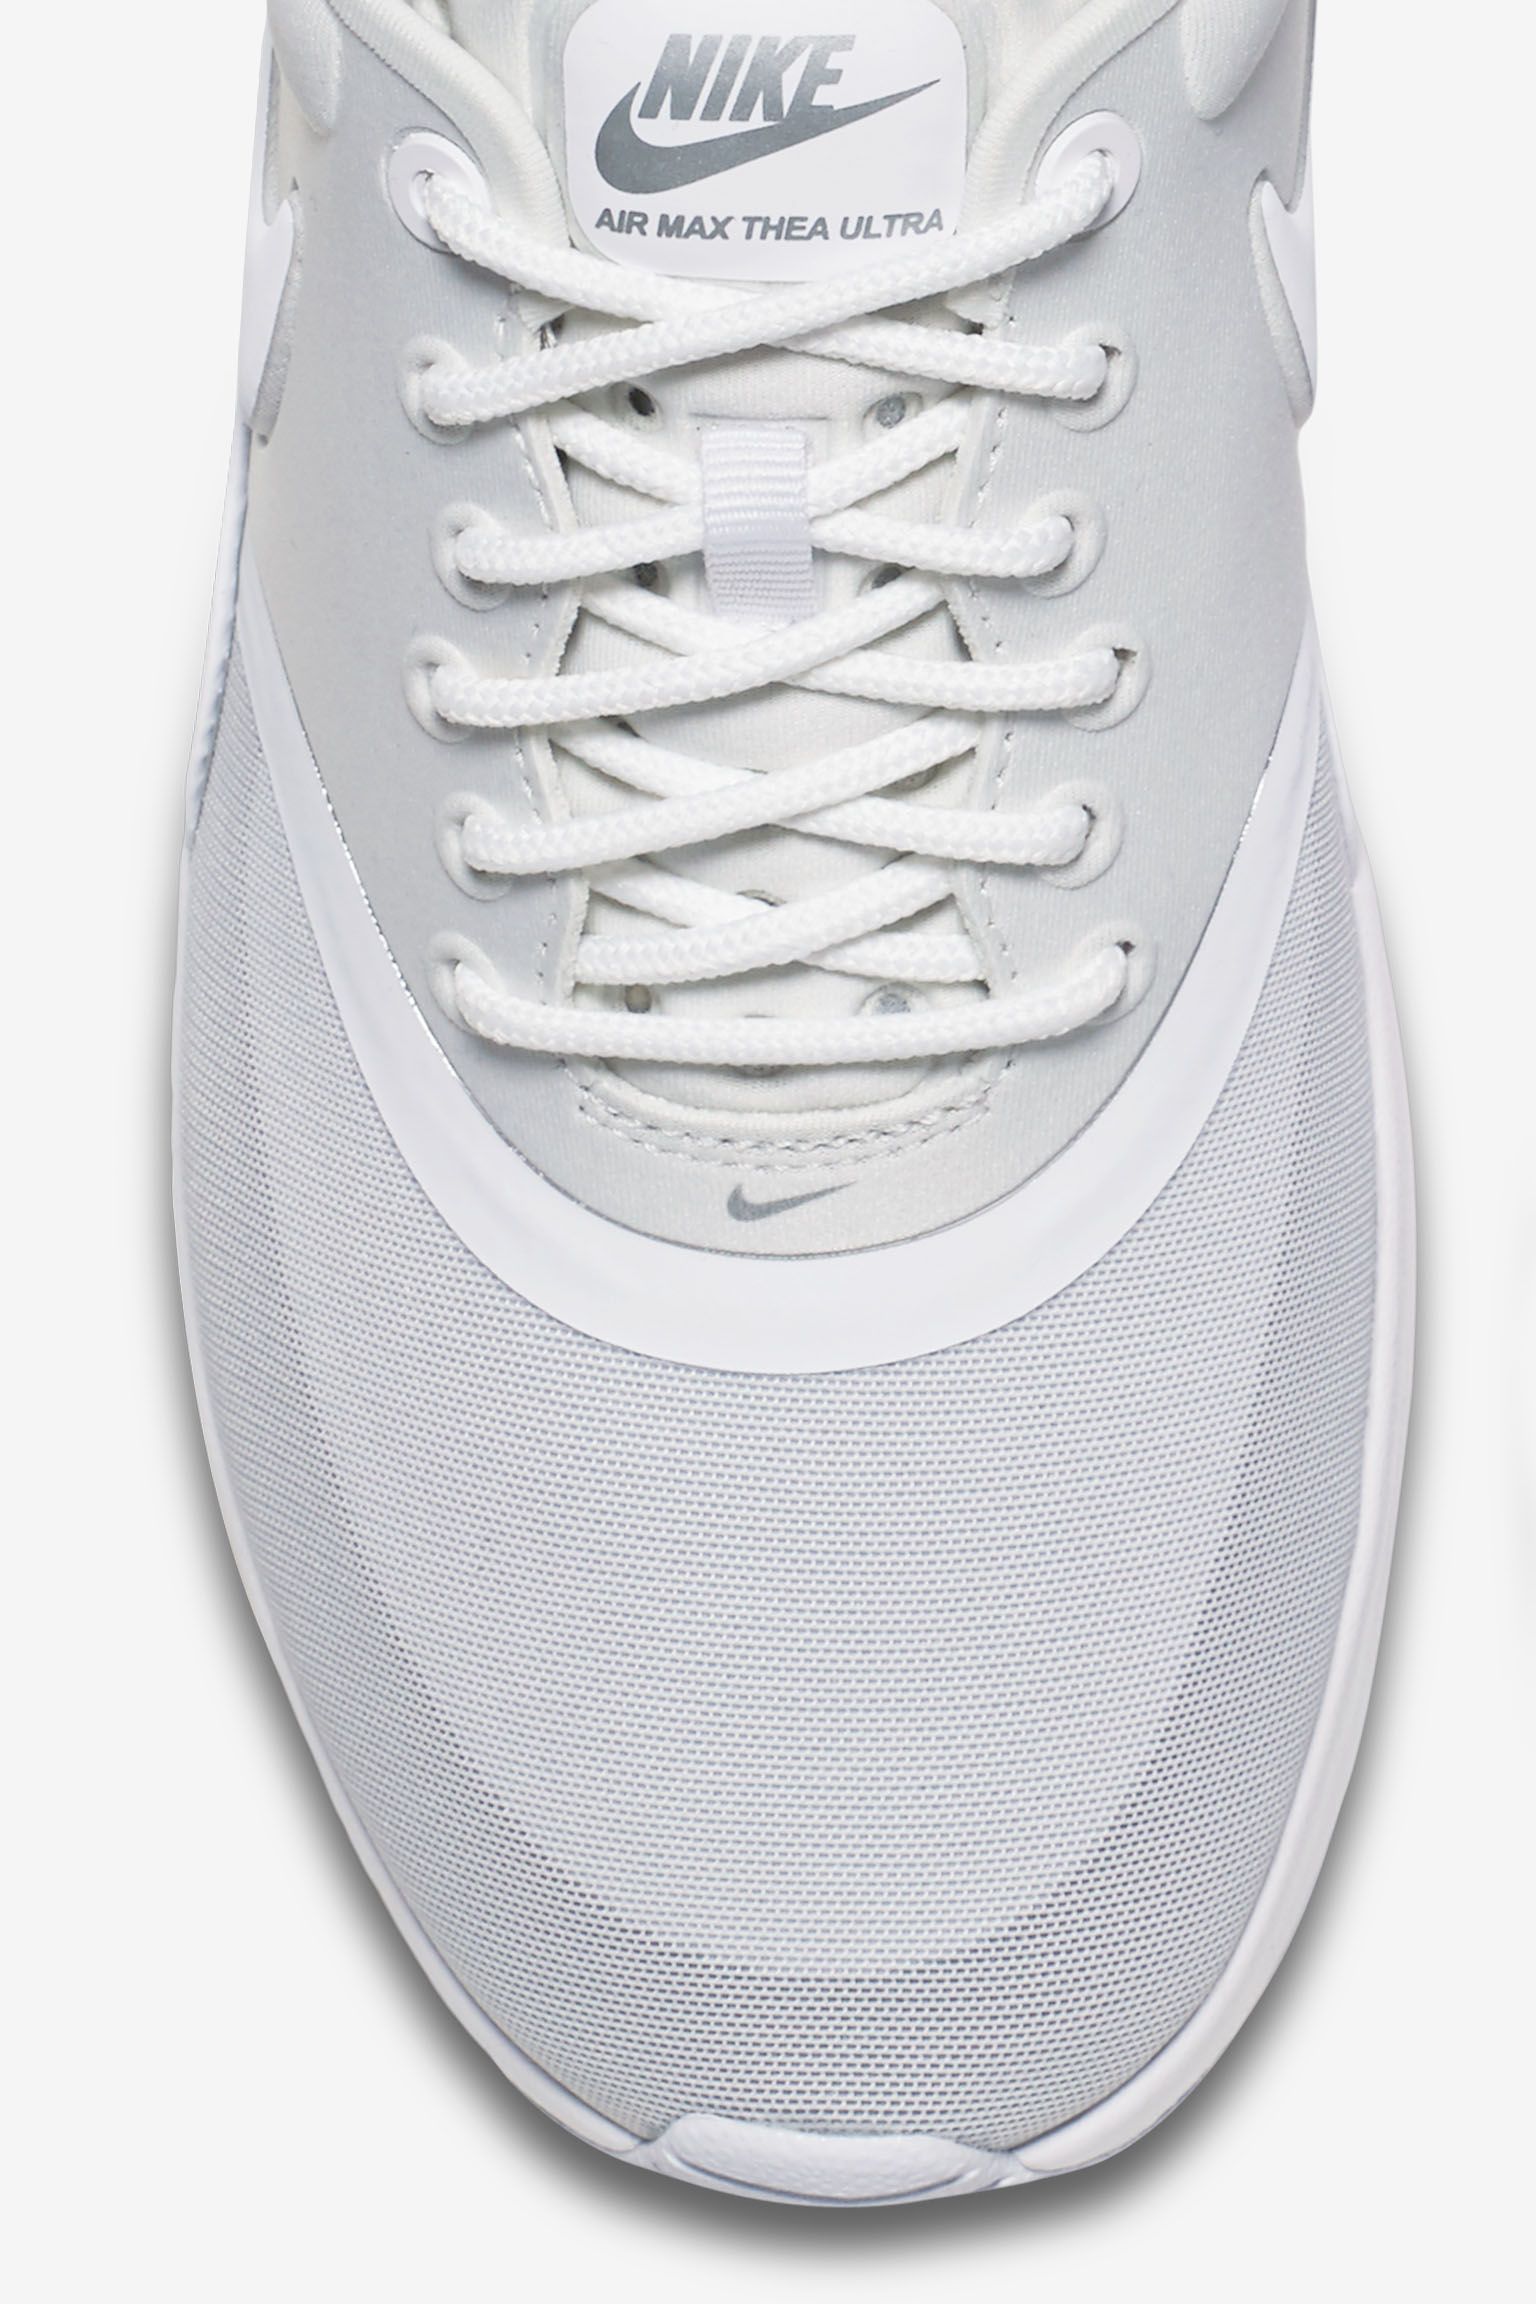 footsteps Magistrate But Women's Nike Air Max Thea Ultra 'White & Silver'. Nike SNKRS